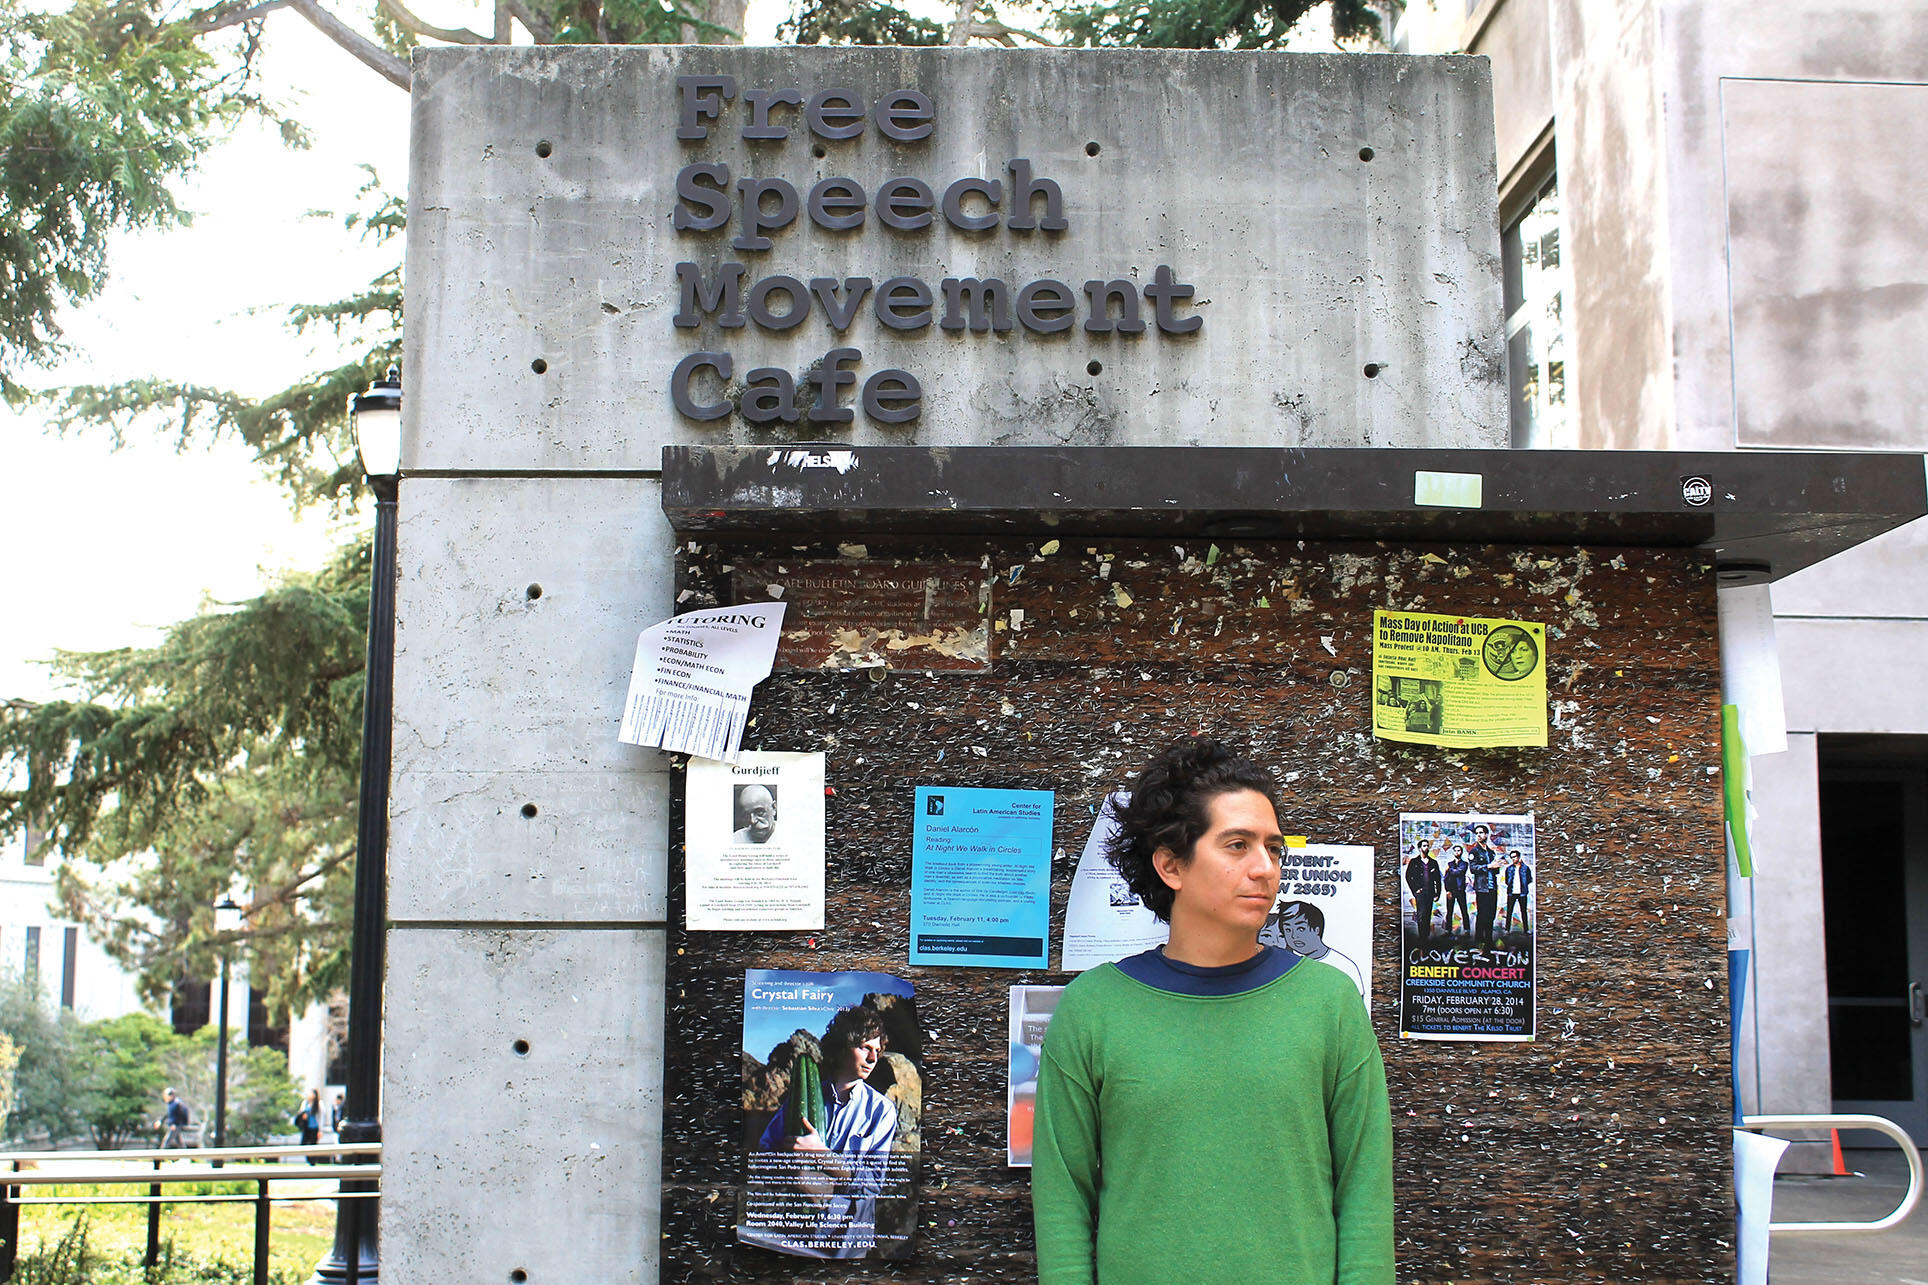 Daniel Alarcón outside the Free Speech Movement Cafe on the Berkeley campus. (Photo by Orit Mohamed.)